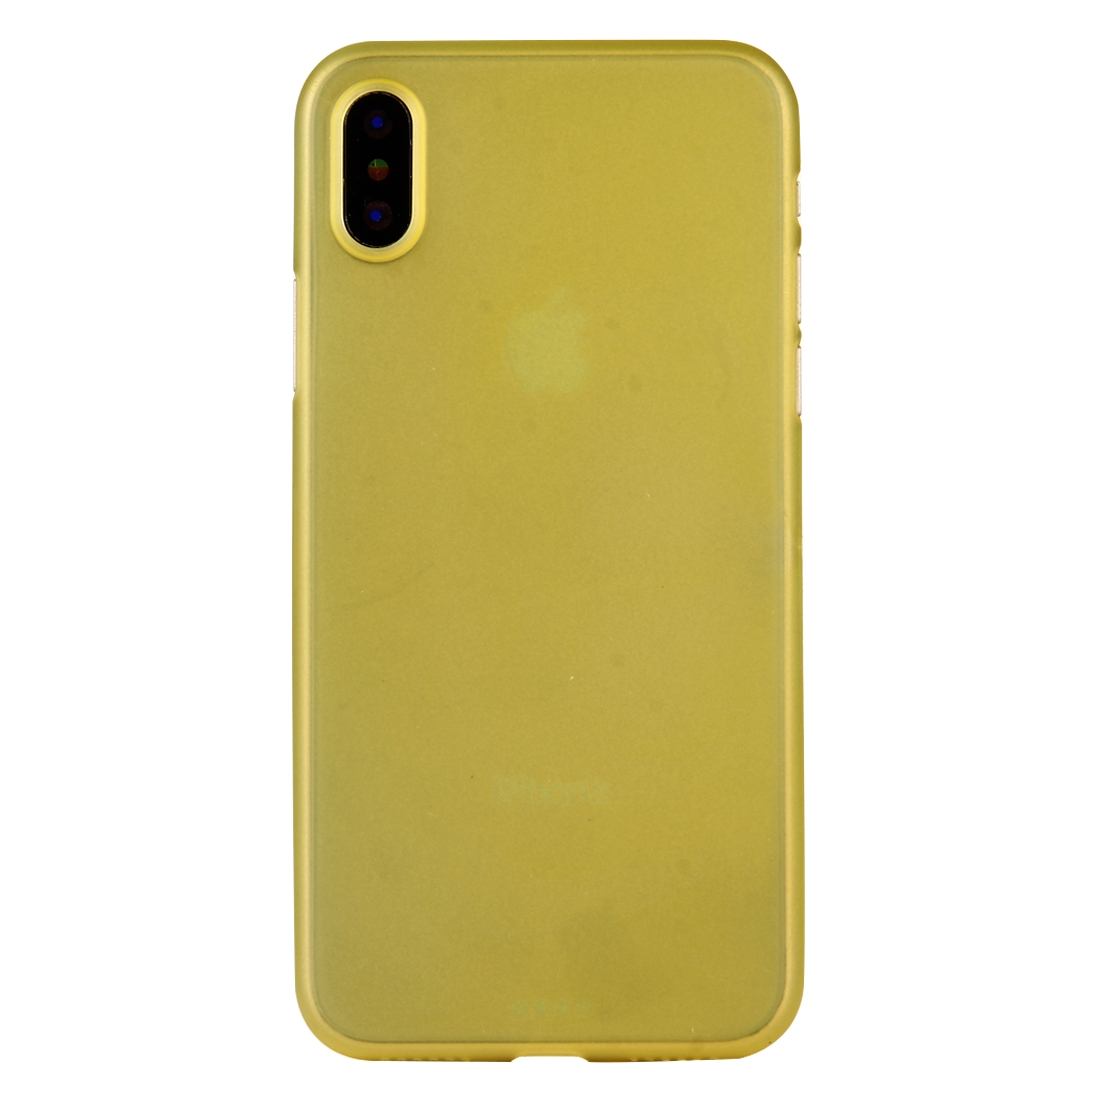 For iPhone XS,X Back Case,Wear-resistant High-Quality Protective Cover,Yellow